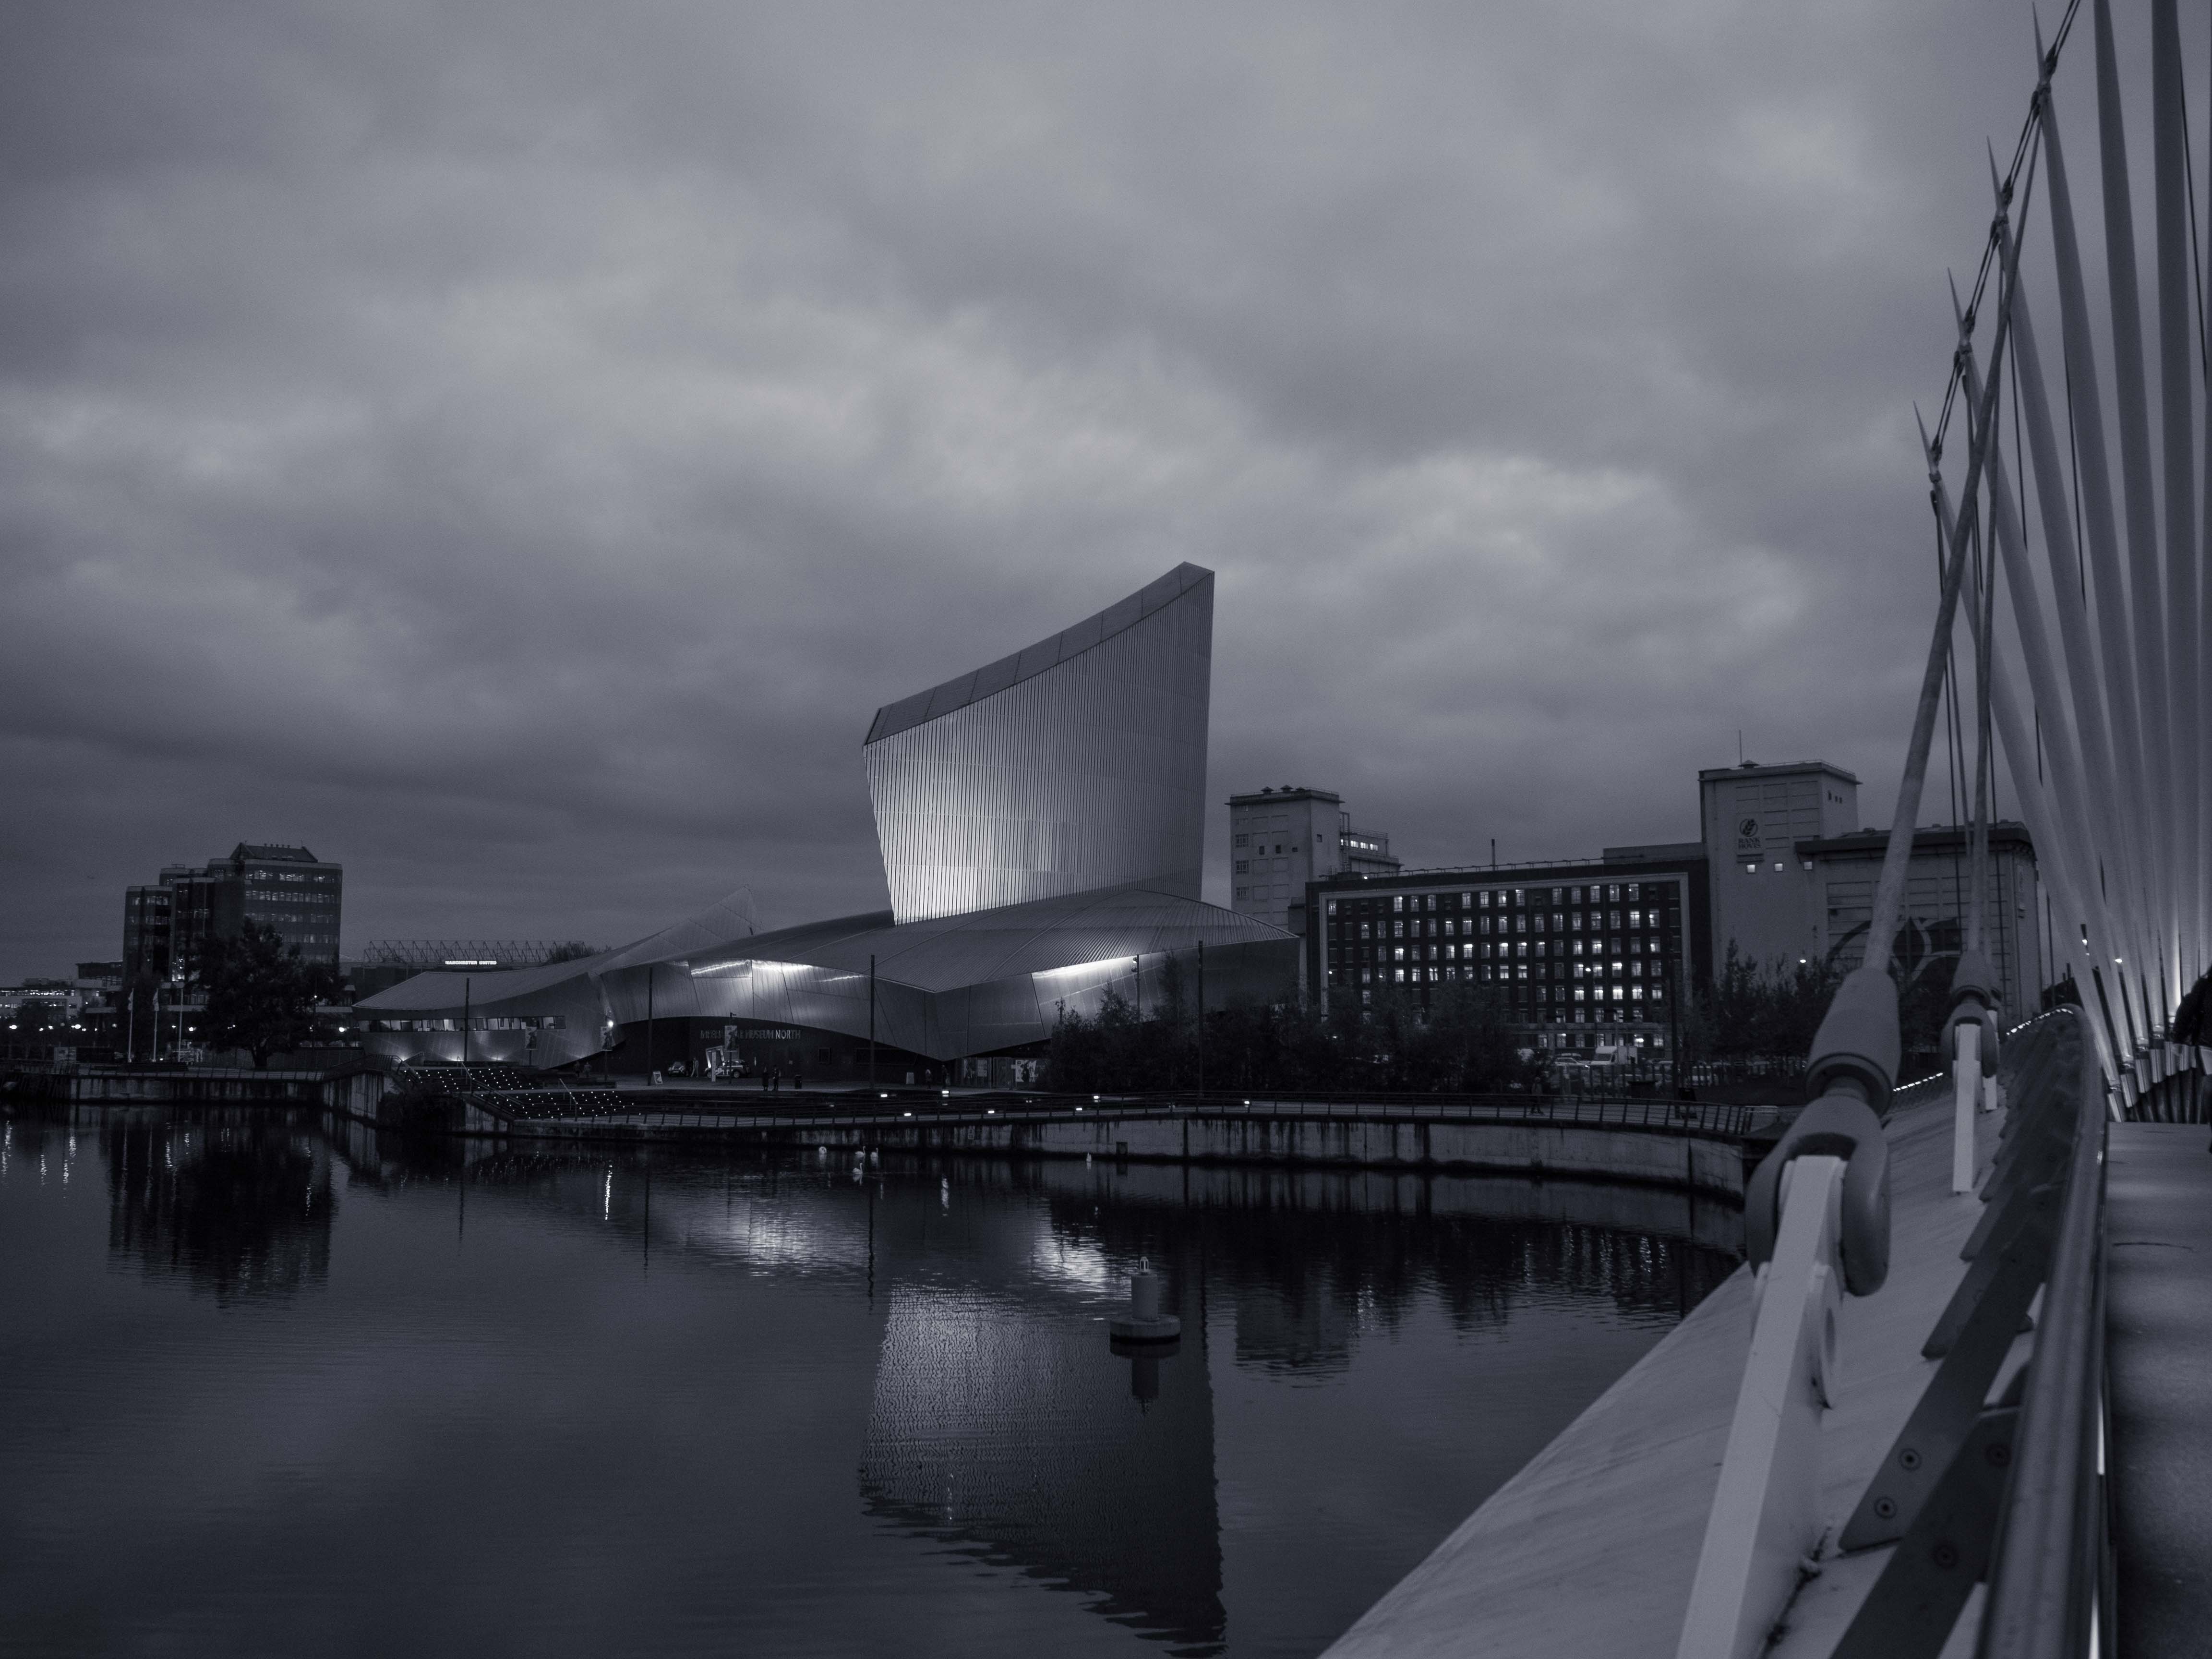 Imperial War Museum, Media City, Manchester